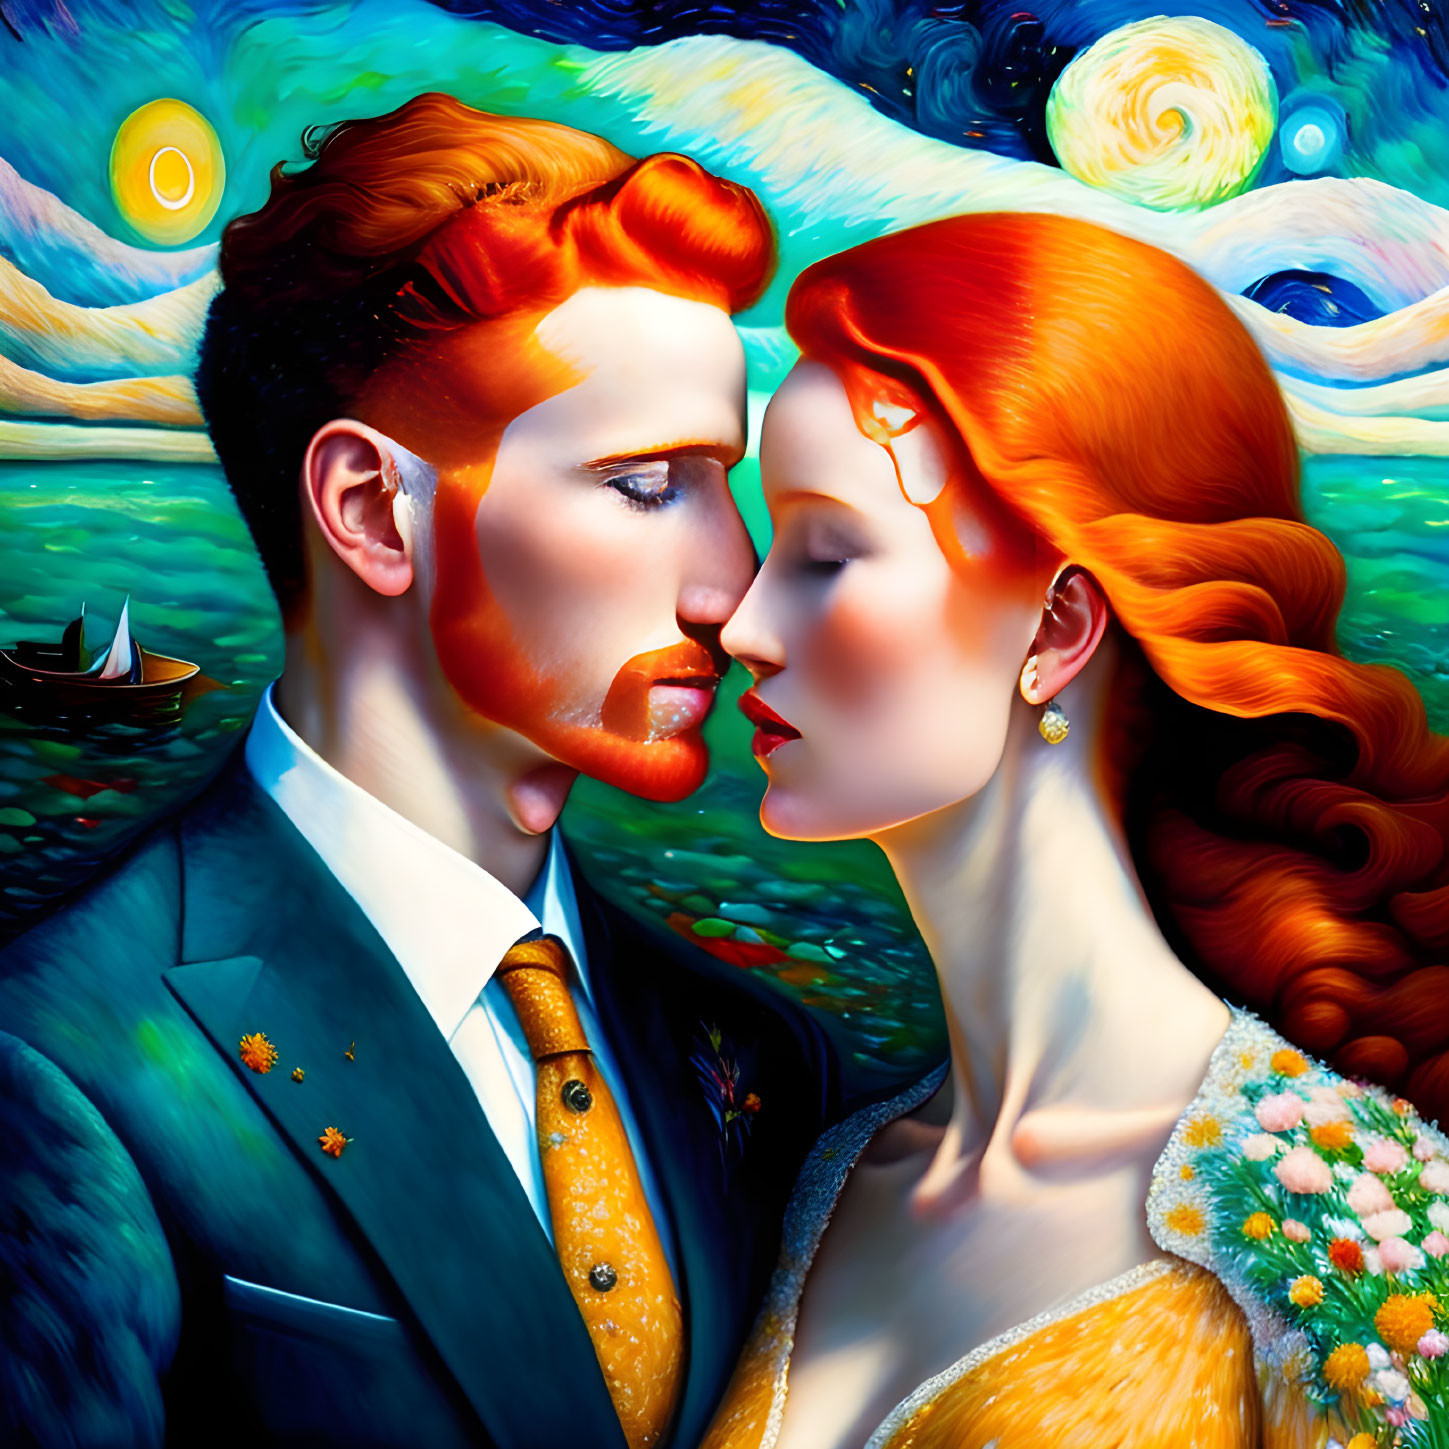 Red-haired couple in profile about to kiss against Van Gogh-inspired starry background